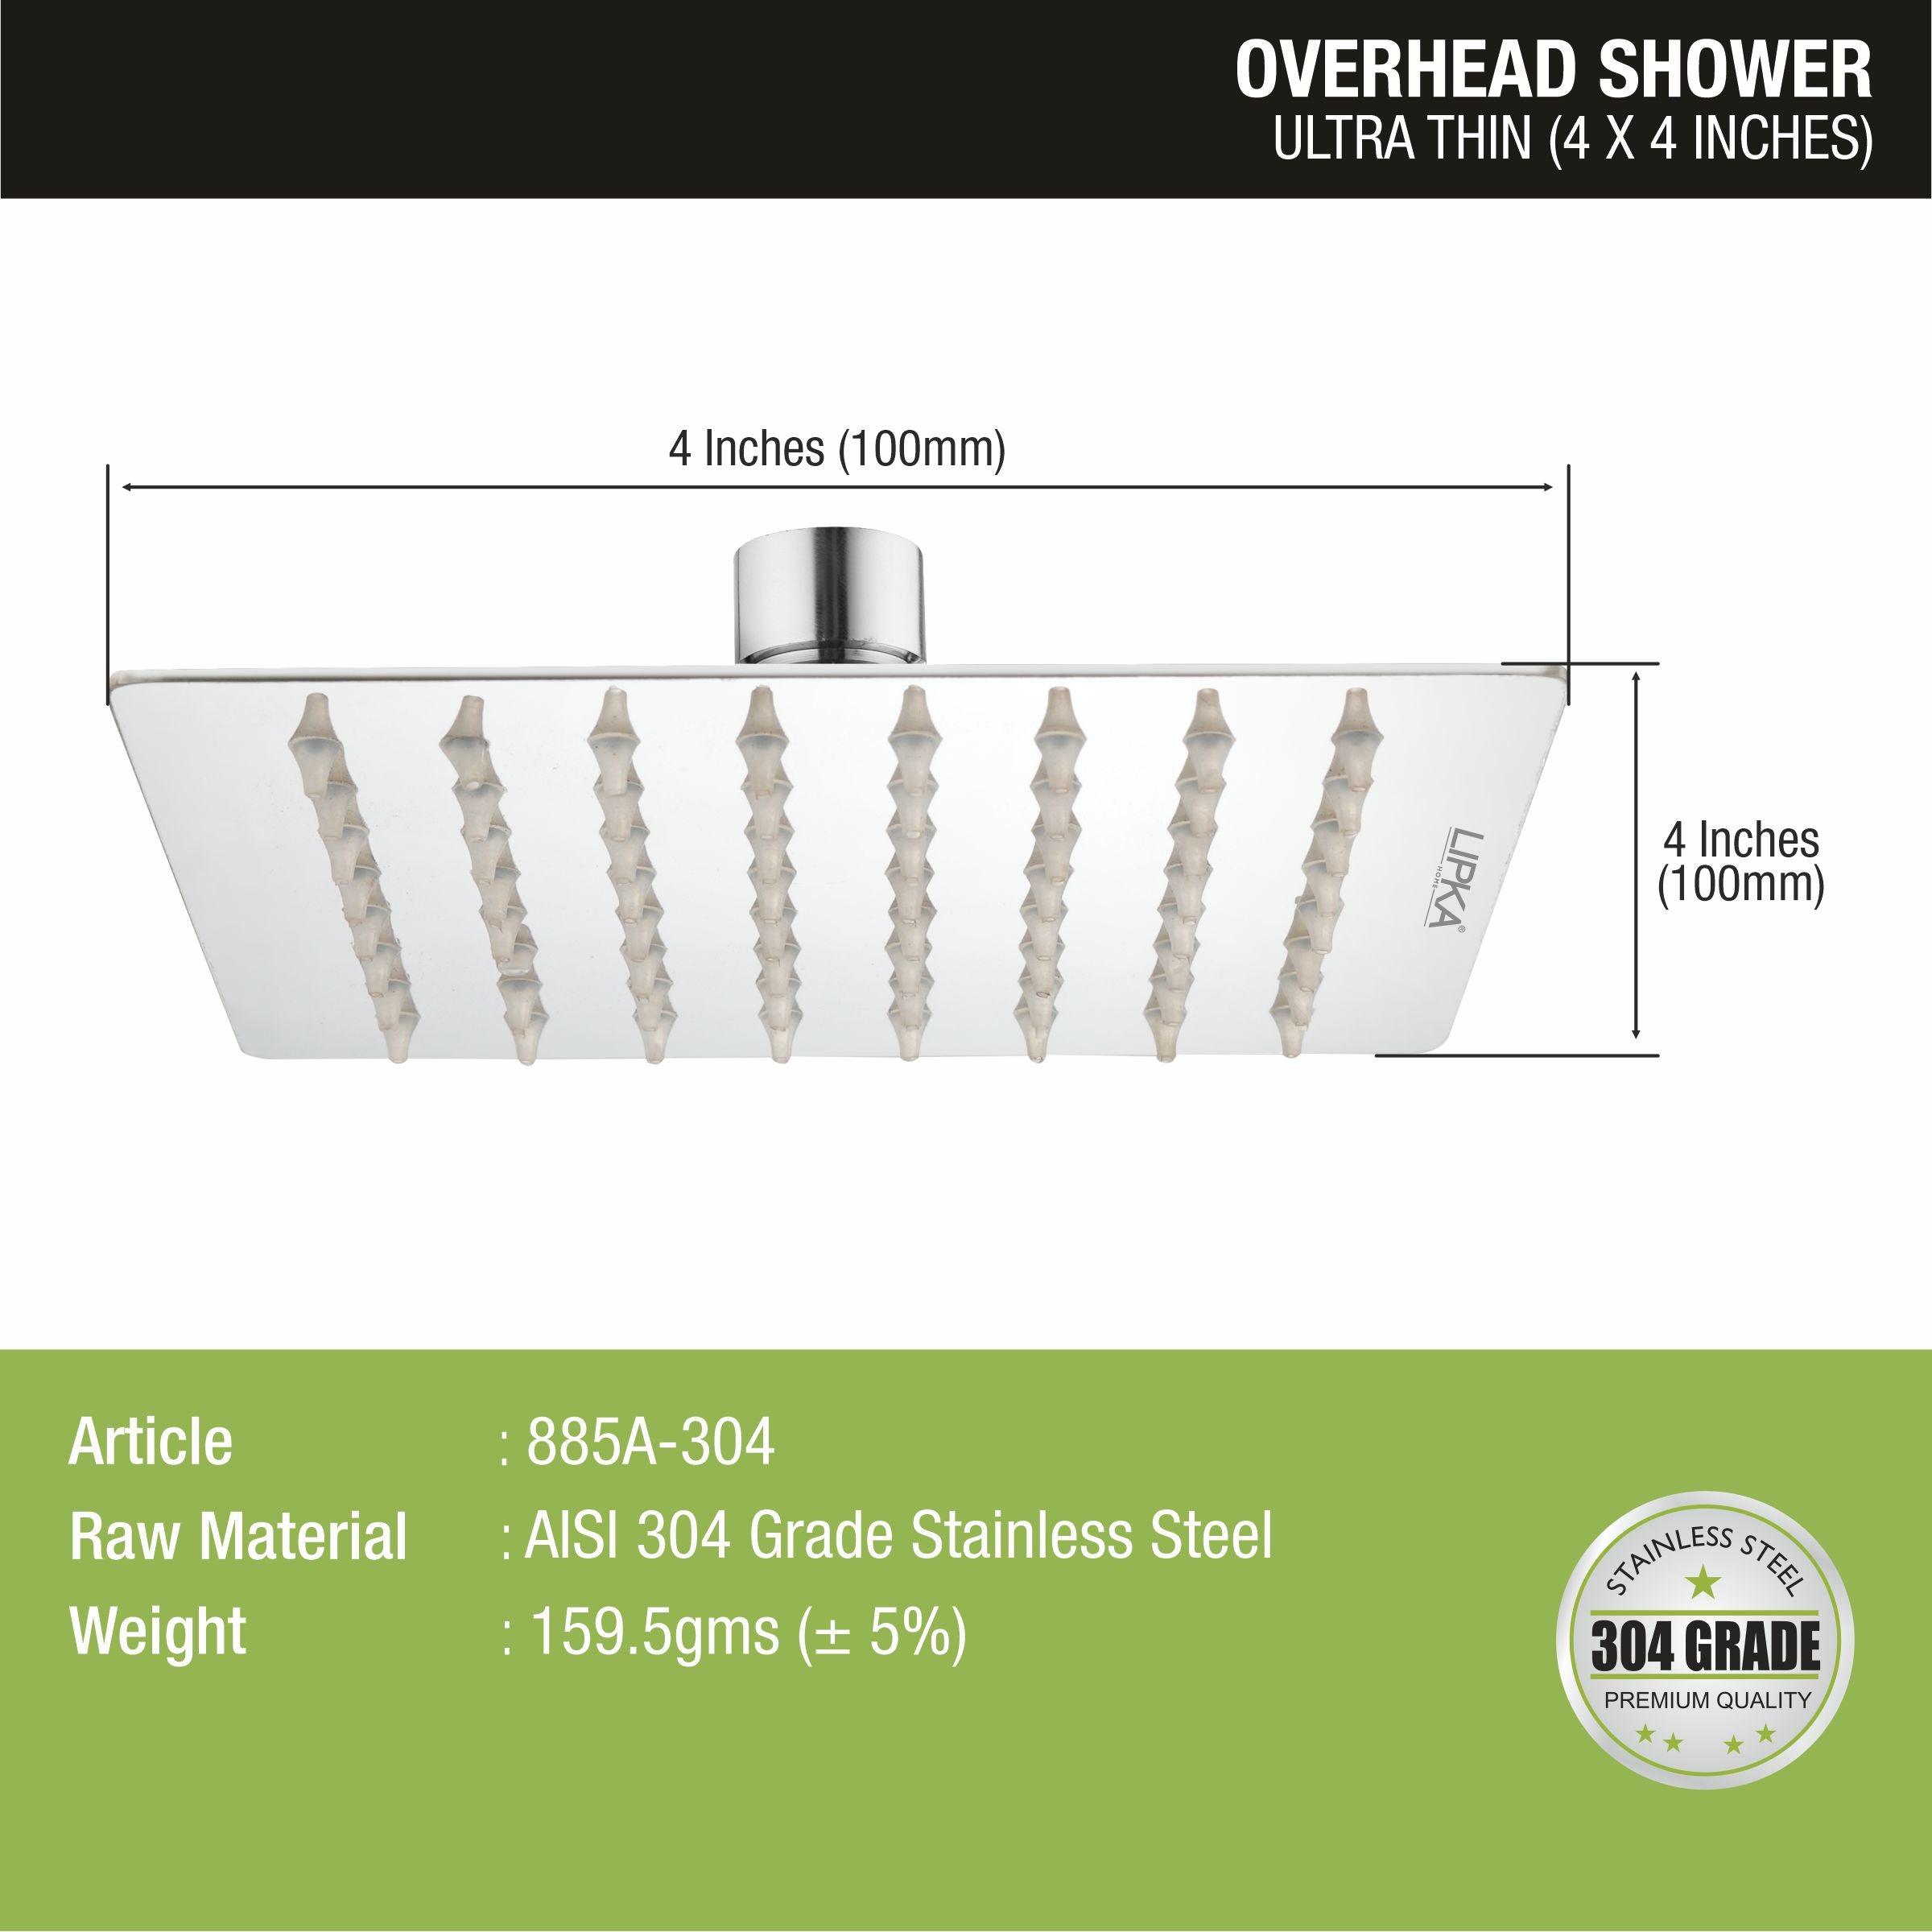 Ultra Thin 304-Grade Overhead Rain Shower (4 x 4 Inches) sizes and dimensions